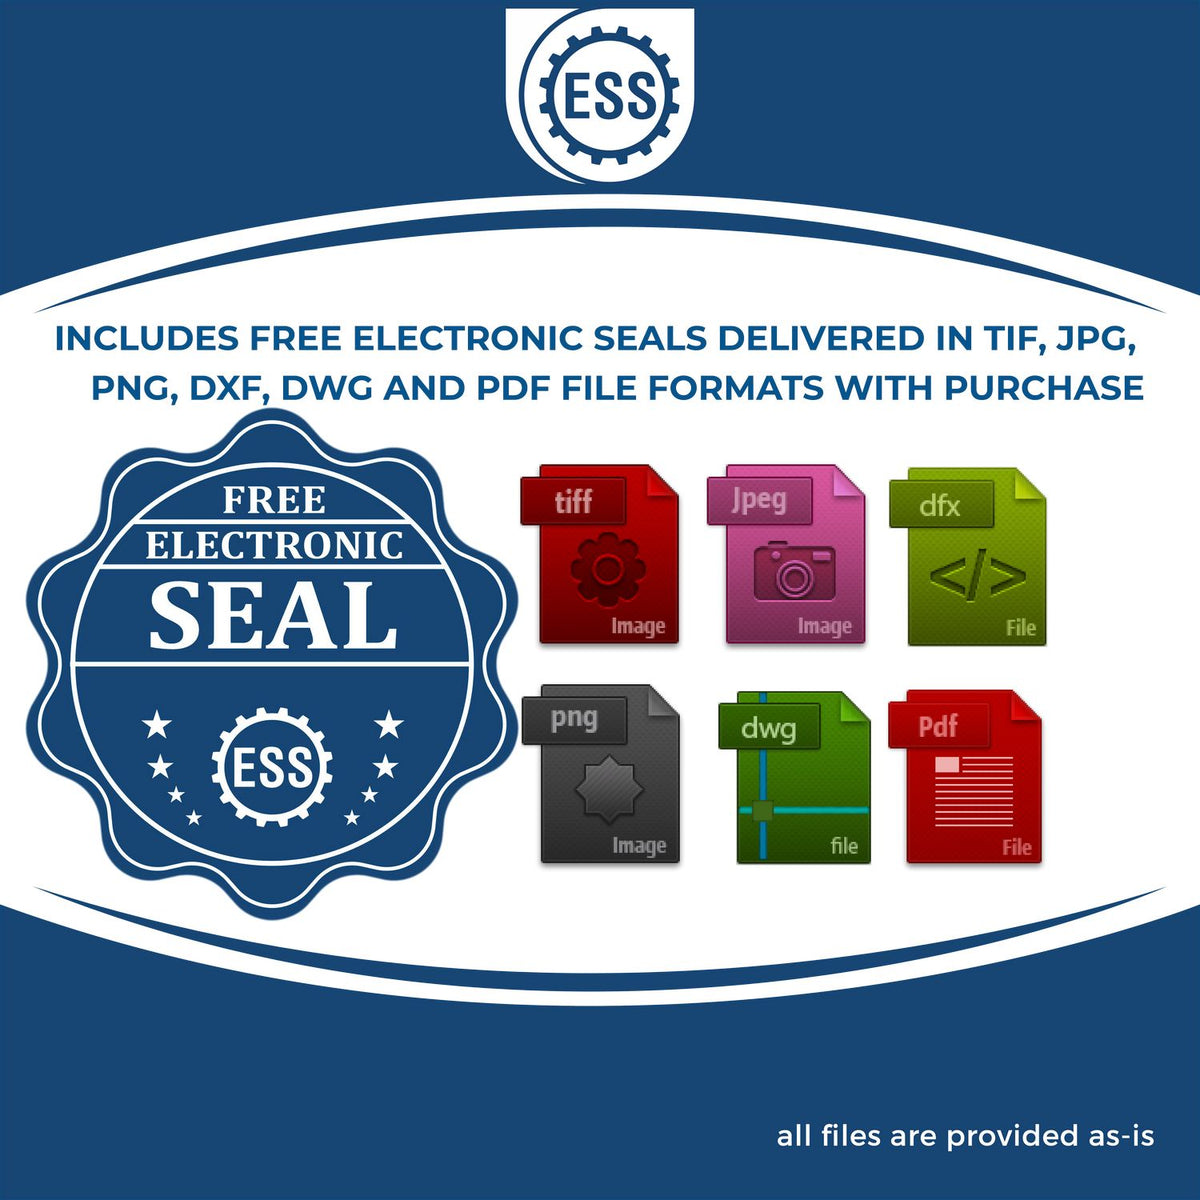 An infographic for the free electronic seal for the Premium MaxLight Pre-Inked Massachusetts Landscape Architectural Stamp illustrating the different file type icons such as DXF, DWG, TIF, JPG and PNG.